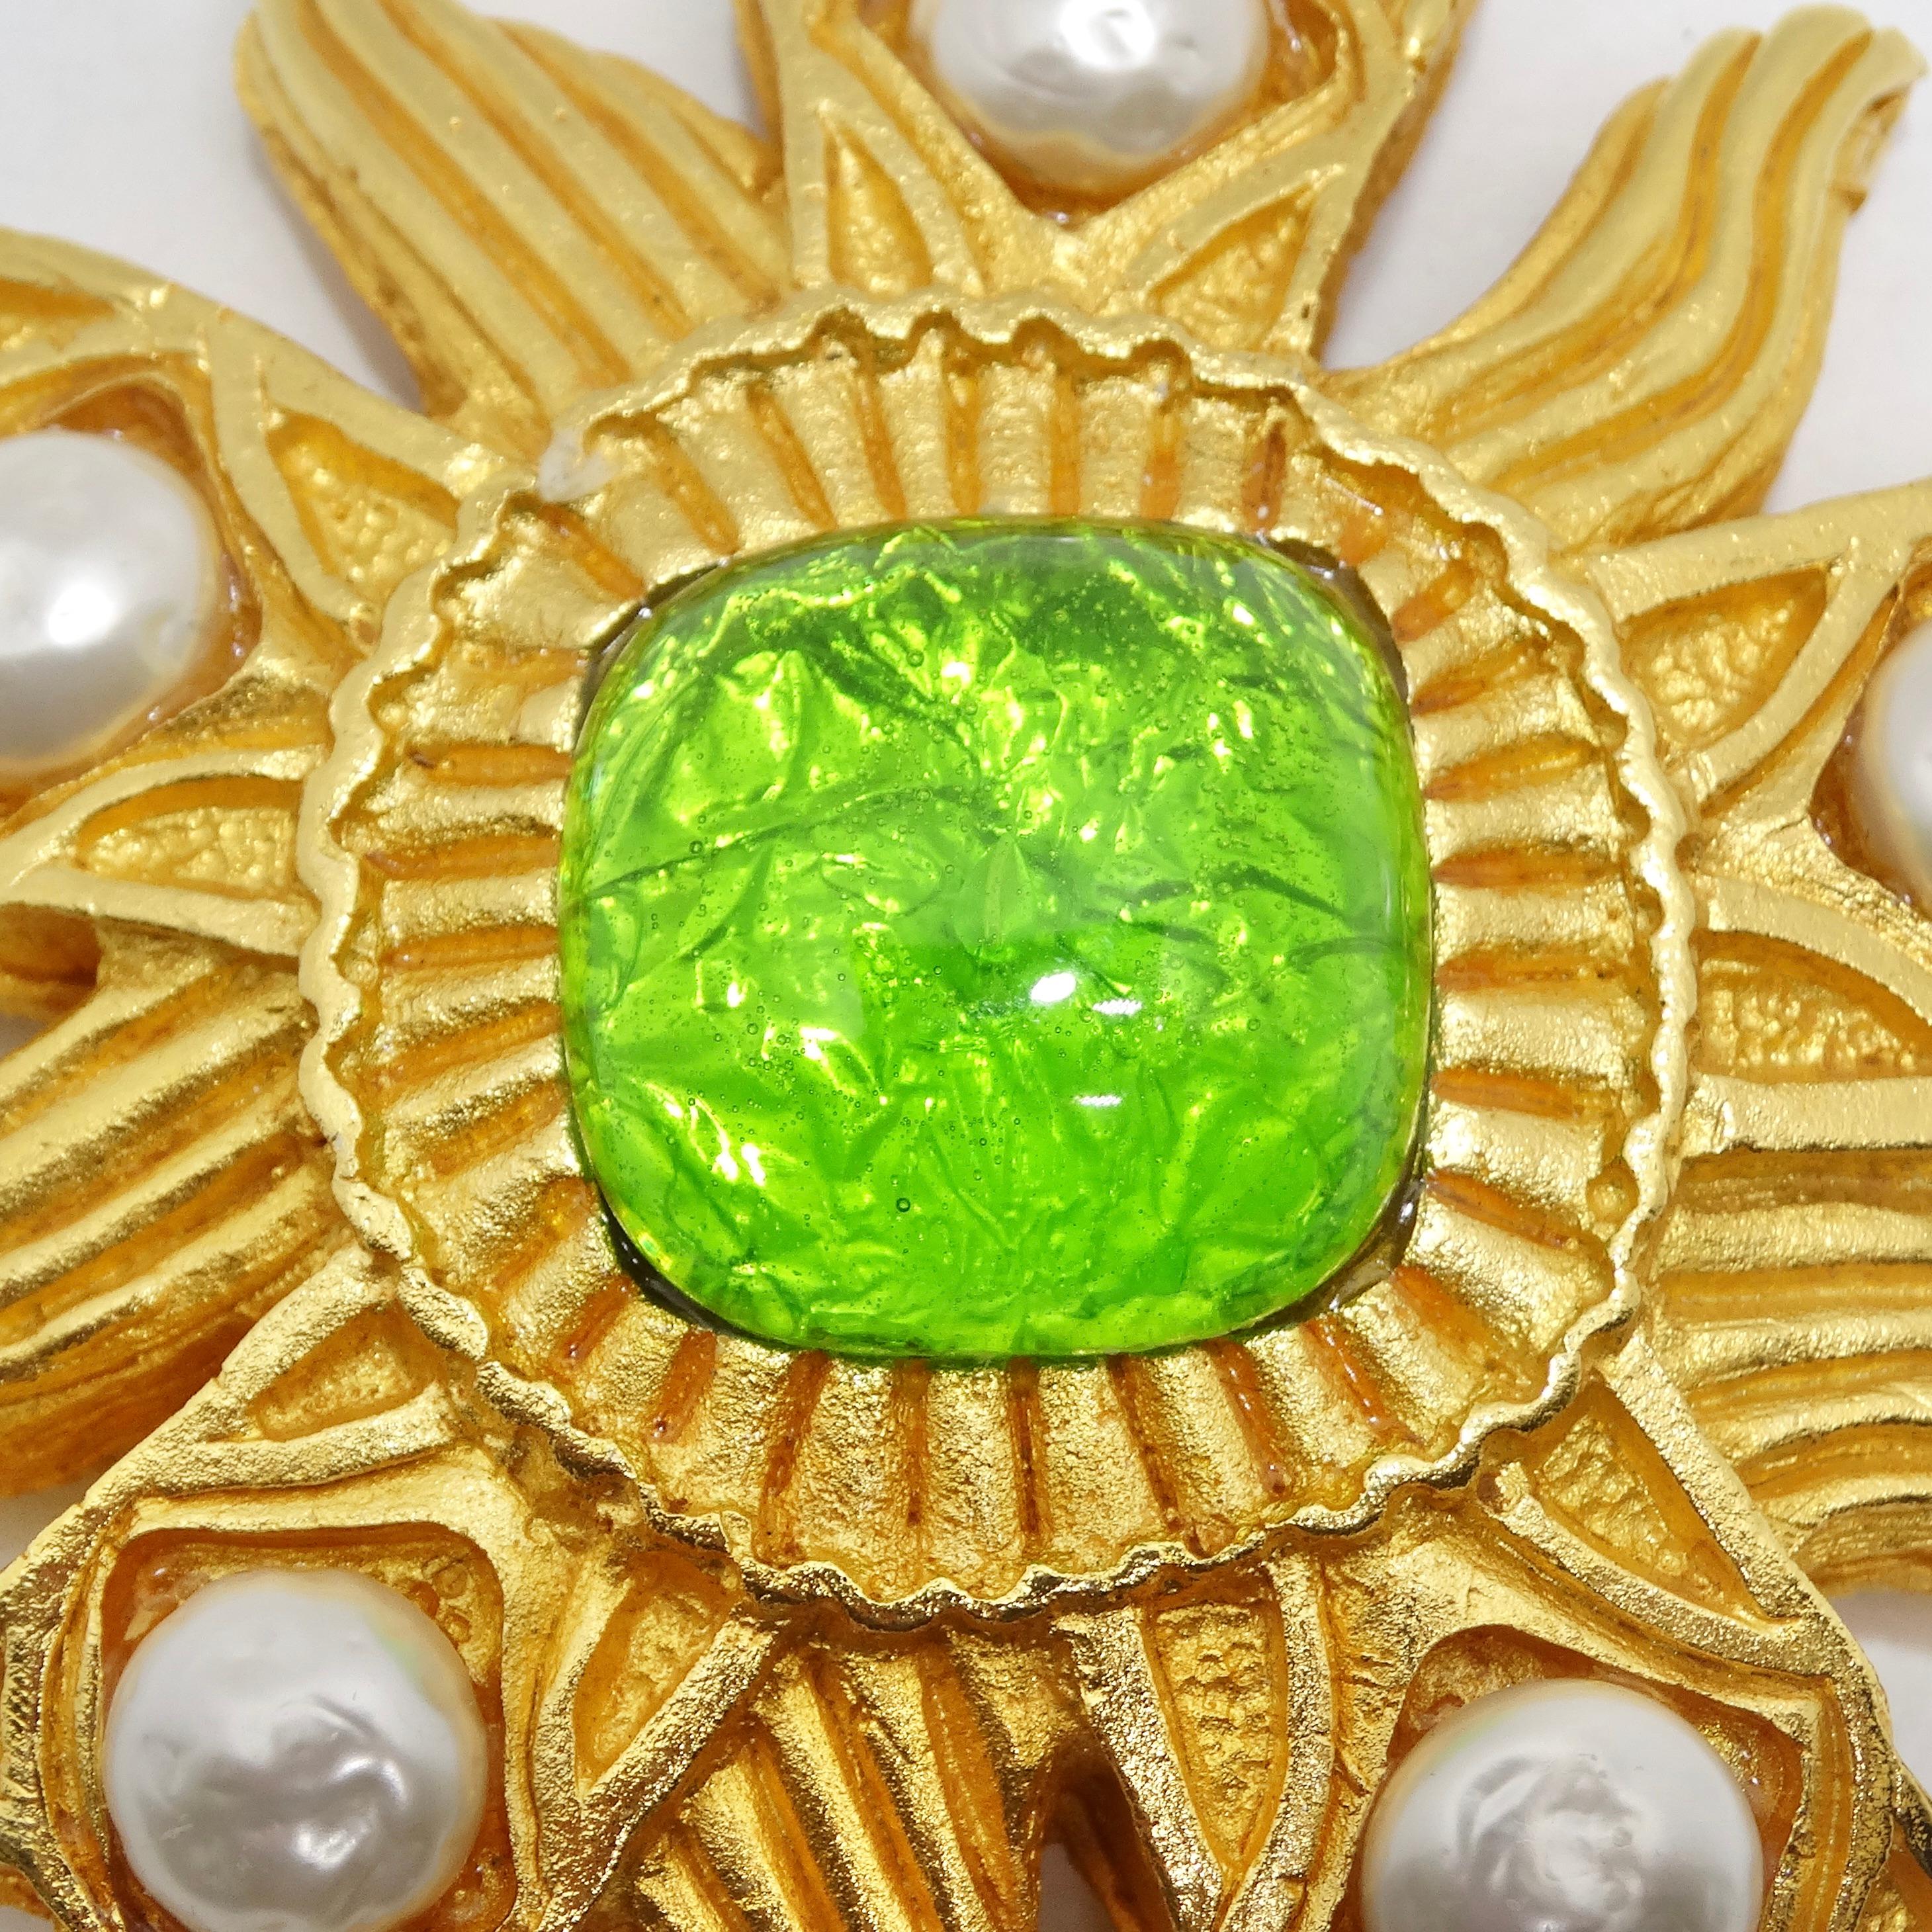 Get your hands on a magnificent statement piece from the 1980s, the Dominique Aurientis Paris Gold Plated Green Stone Flower Brooch. This beautiful large flower brooch showcases stunning textured yellow gold plating, creating an intricate and